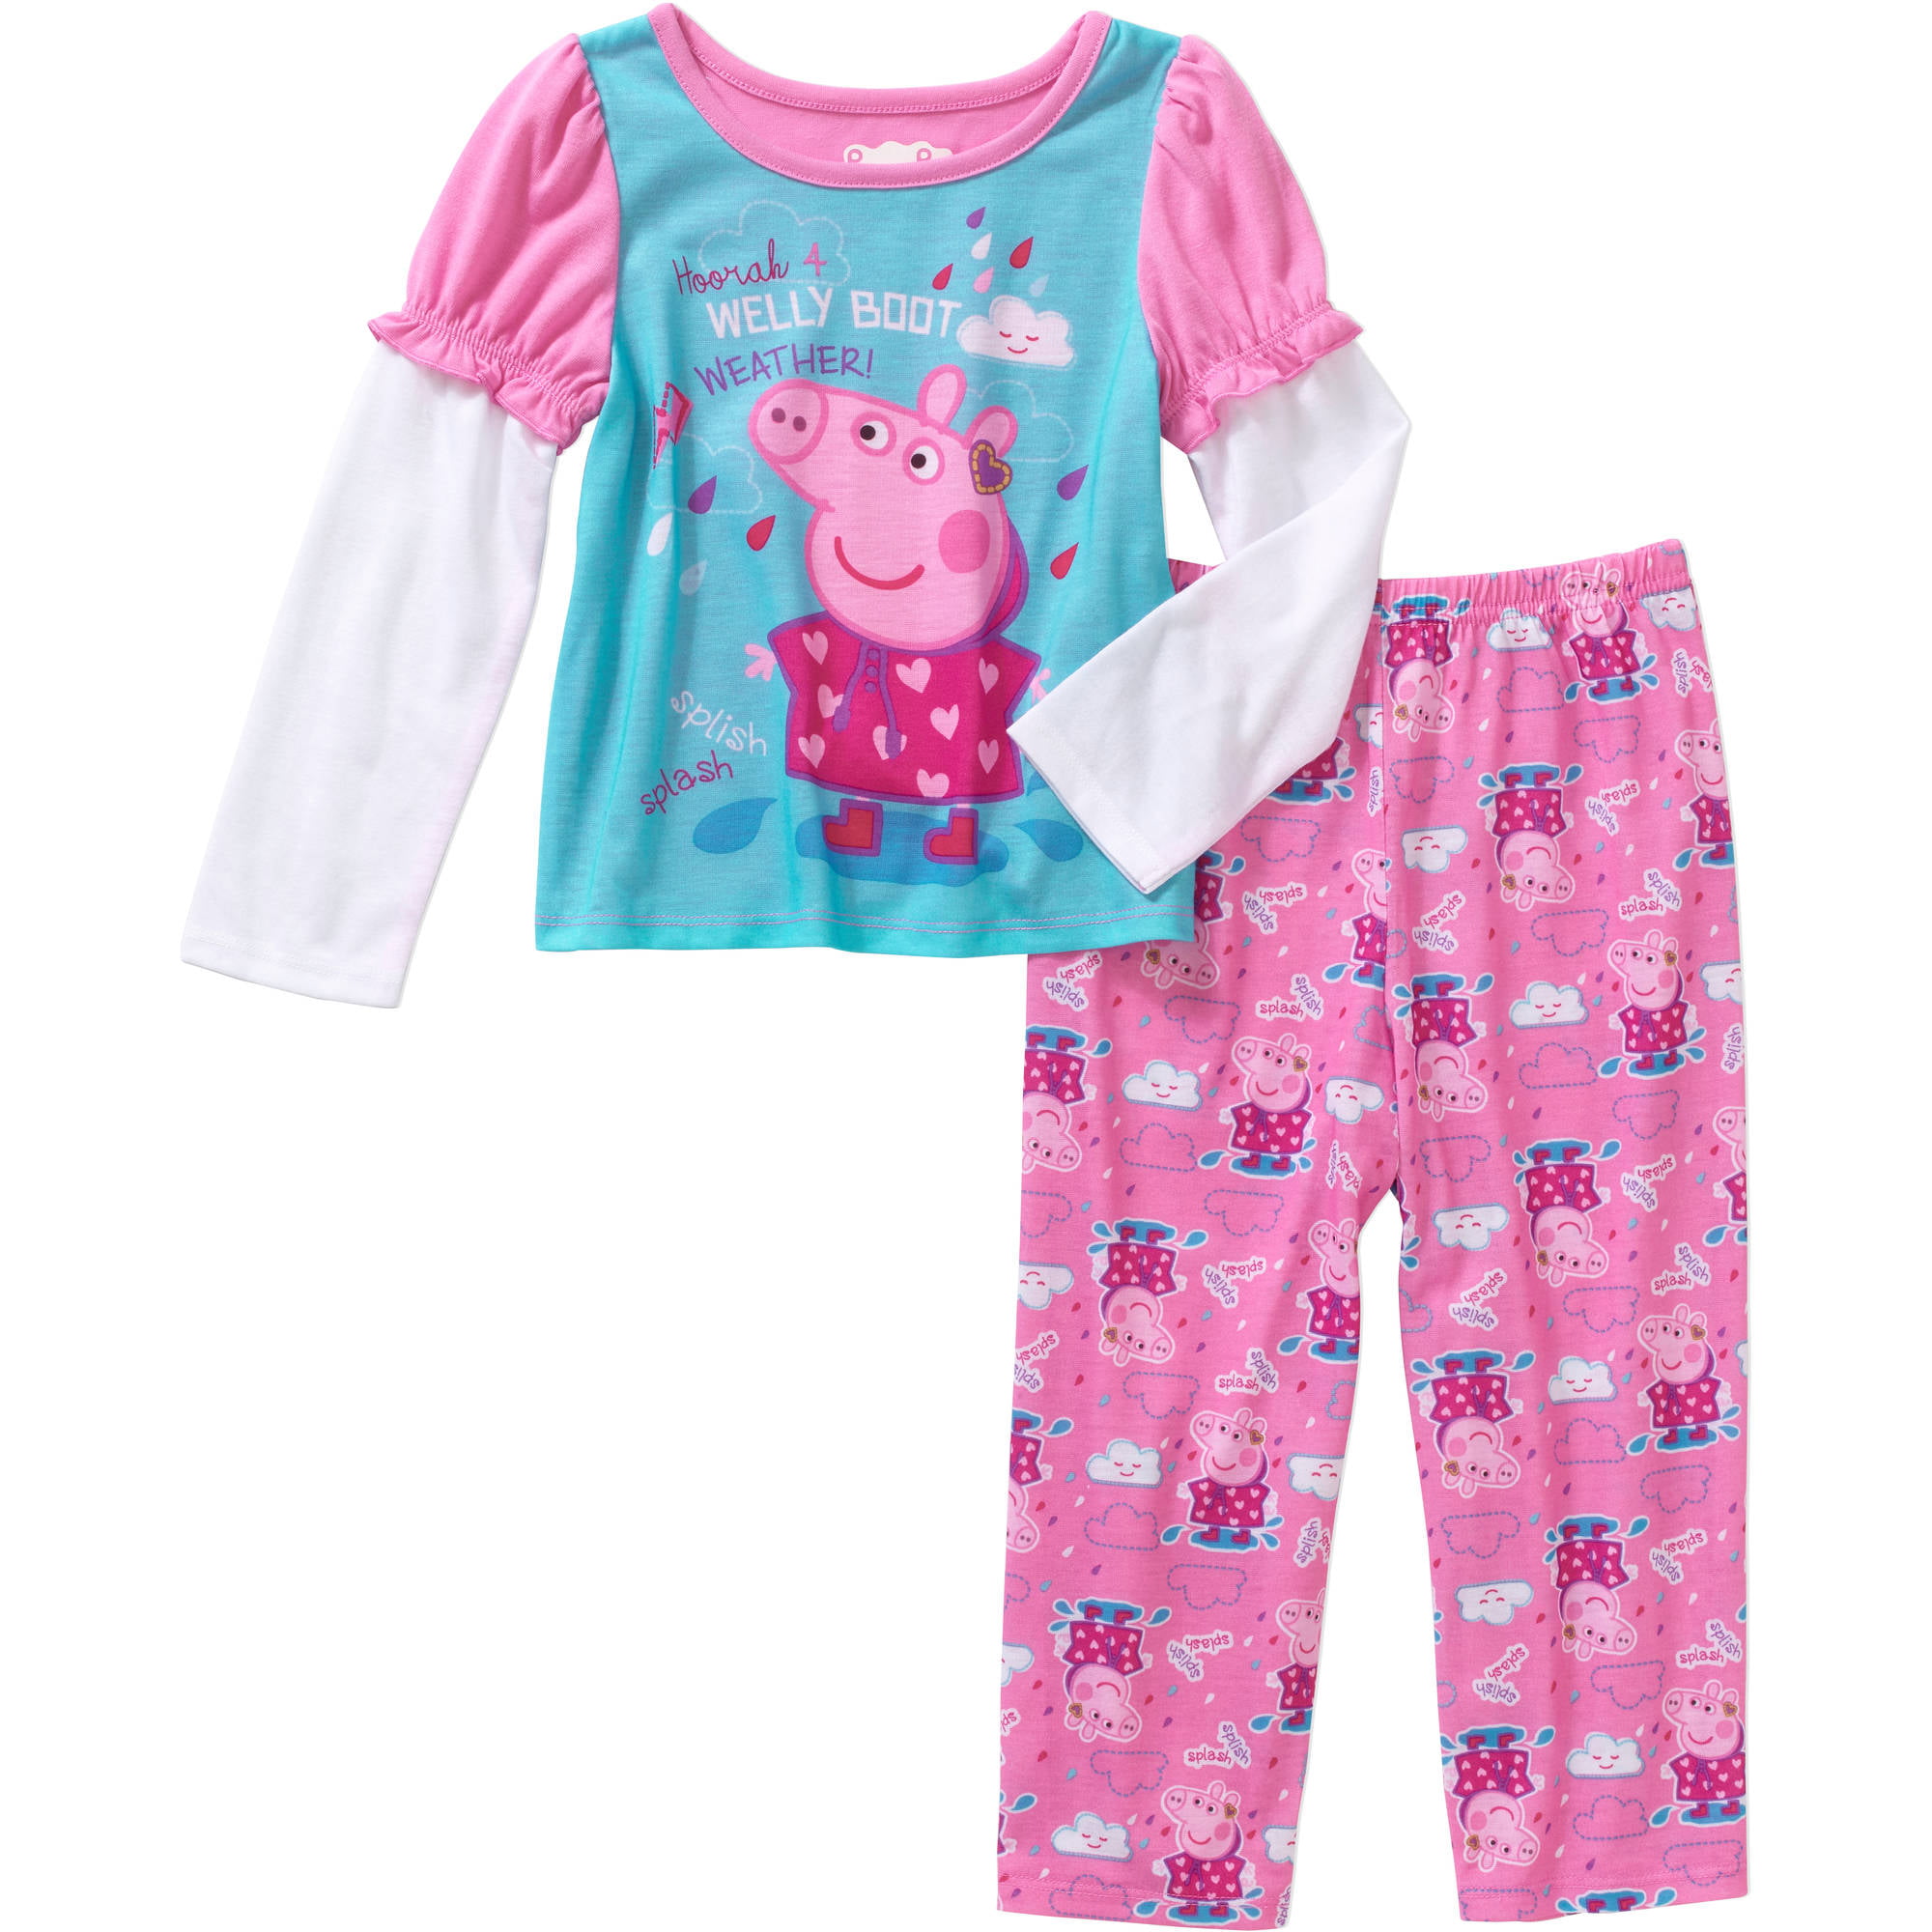 Pjs At Walmart - Well it seems a lot of items are third party items ...